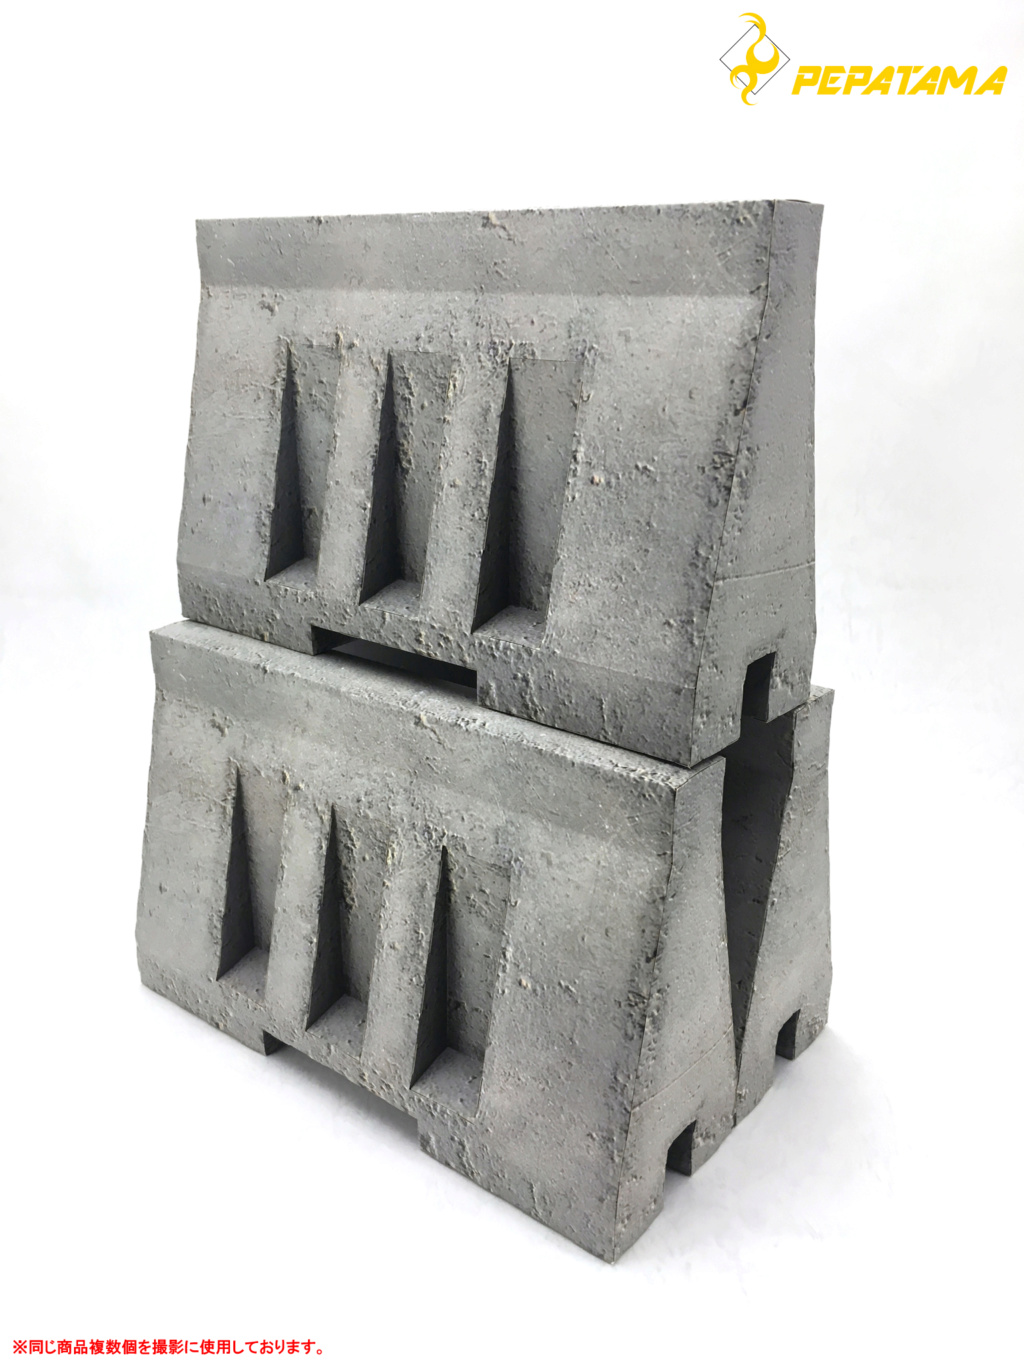 cementbarrier - NEW PRODUCT: PEPATAMA: 1/6 PAPER- DIORAMA Series Scene Props Paper Model - Oil Barrel & Cement Barrier 19585910